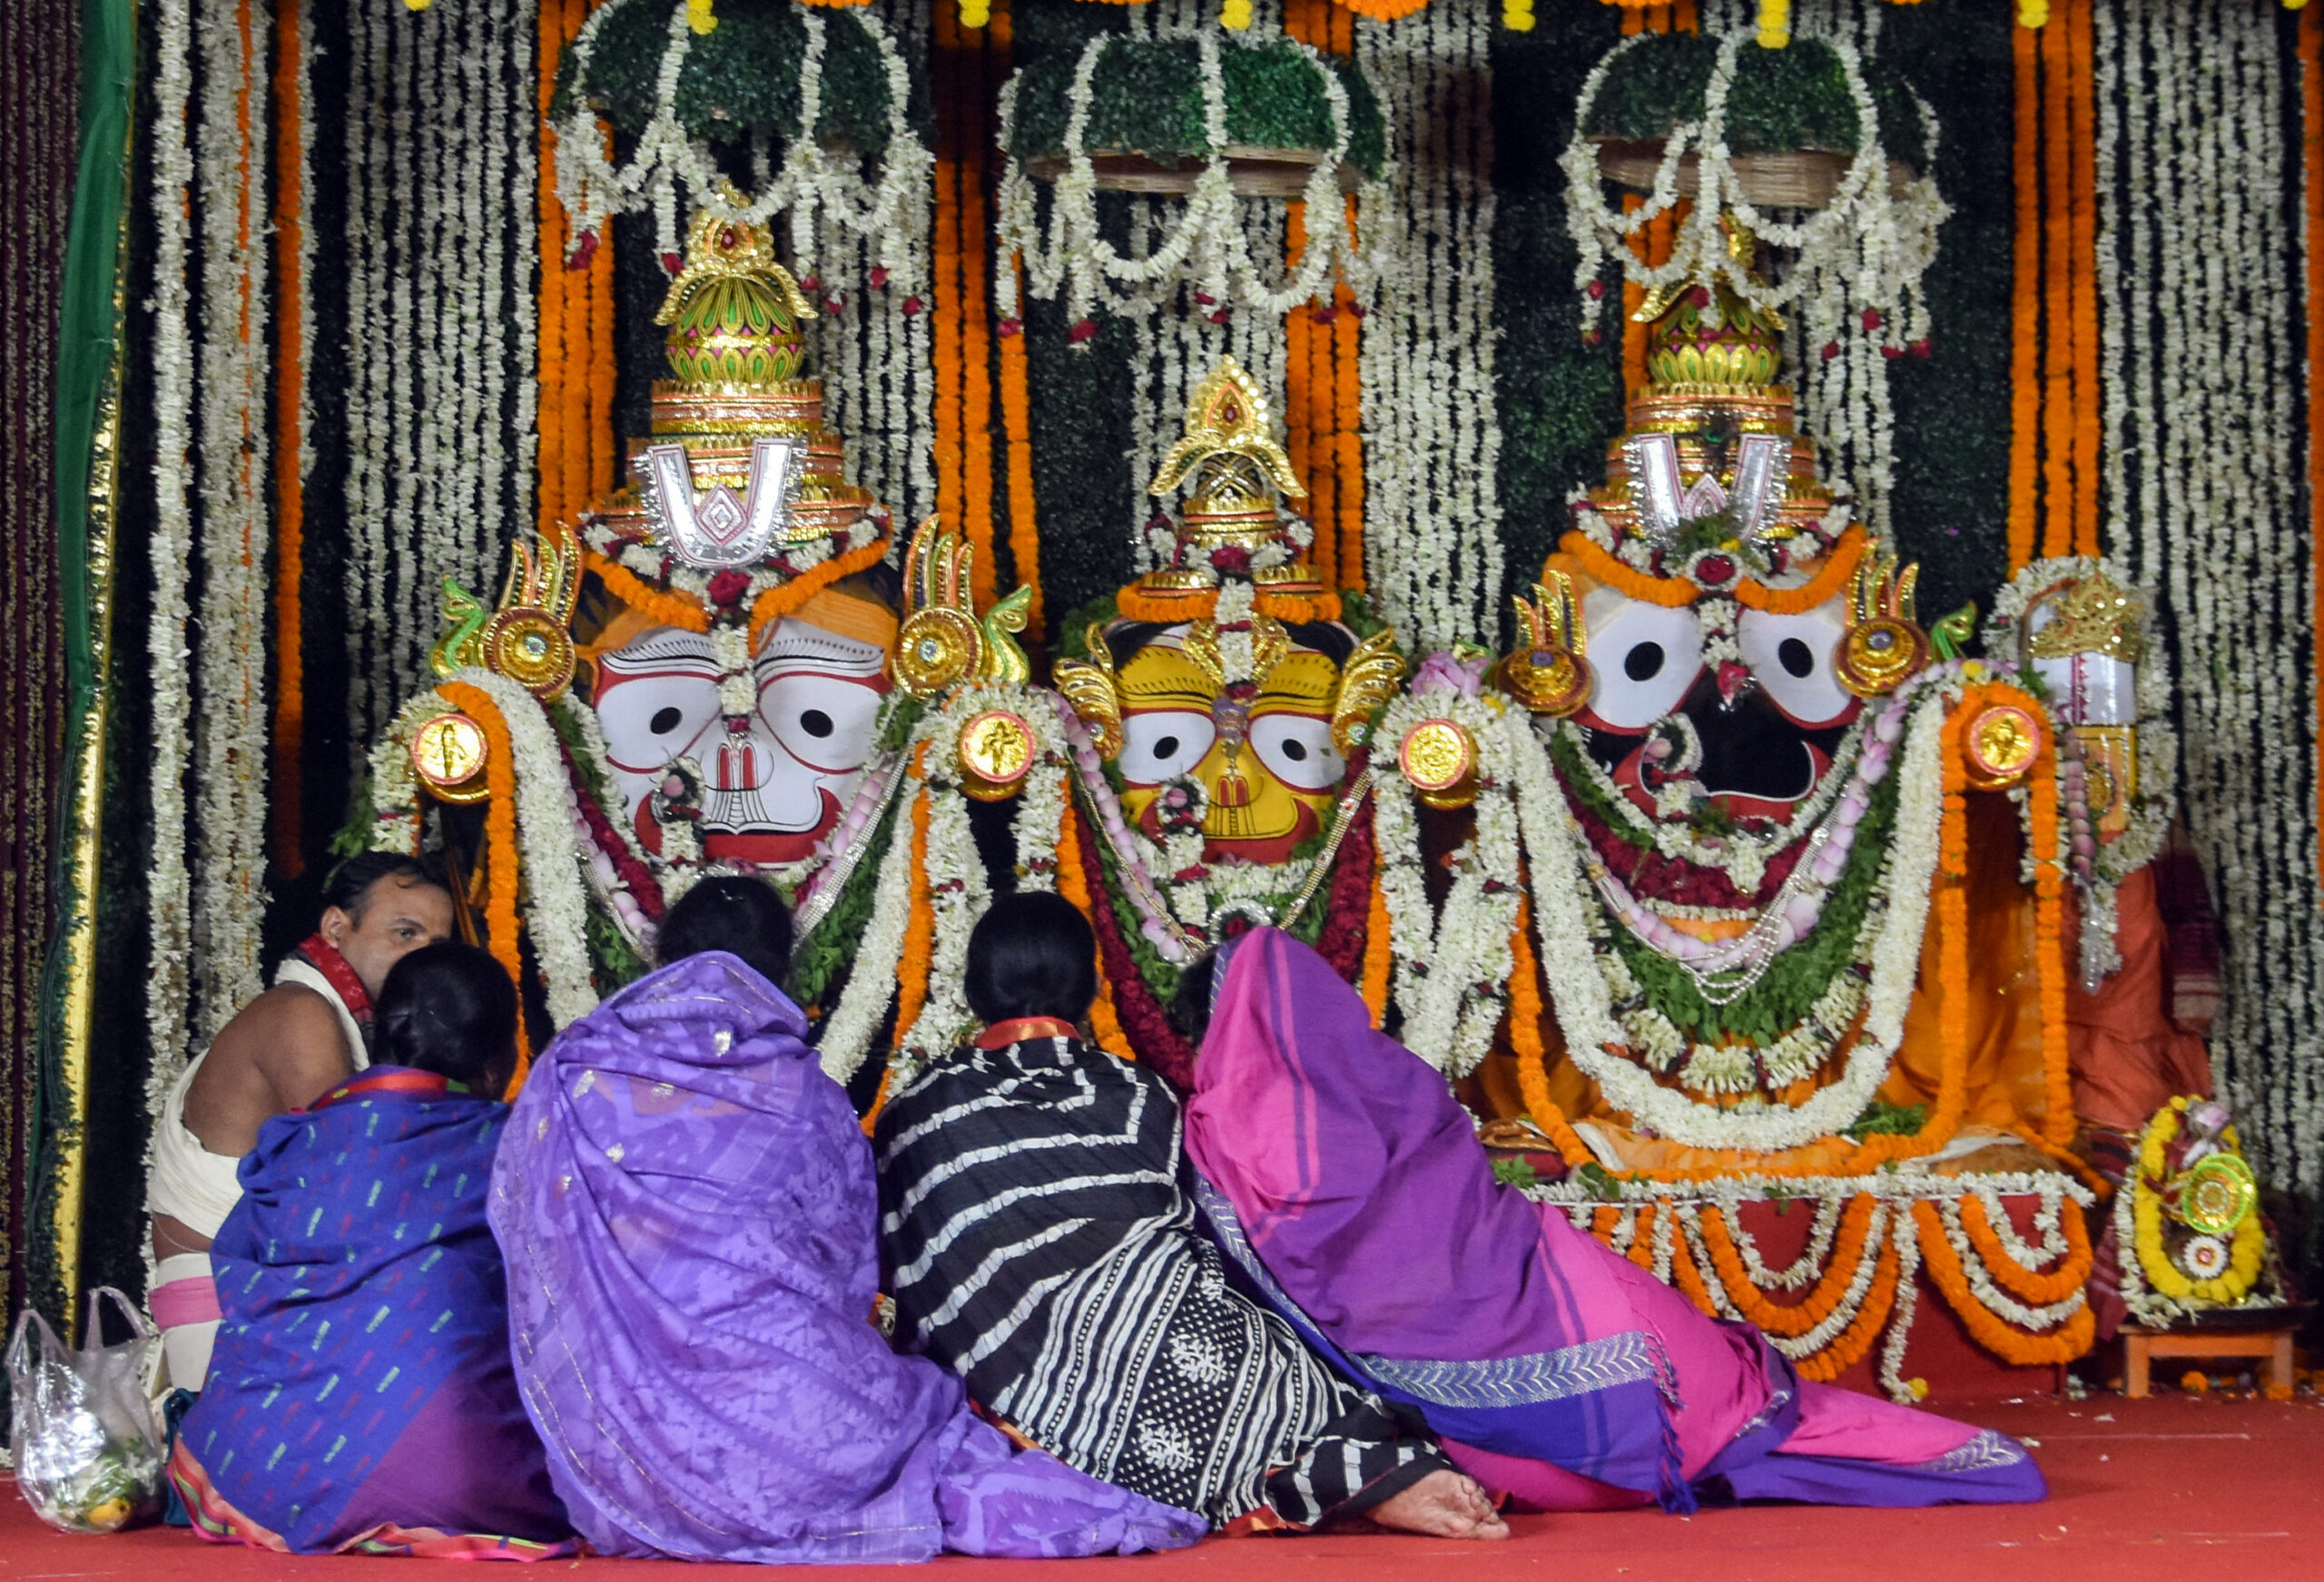 Devotees congregate in Puri for Bahuda Rath Yatra on 9th day of festival